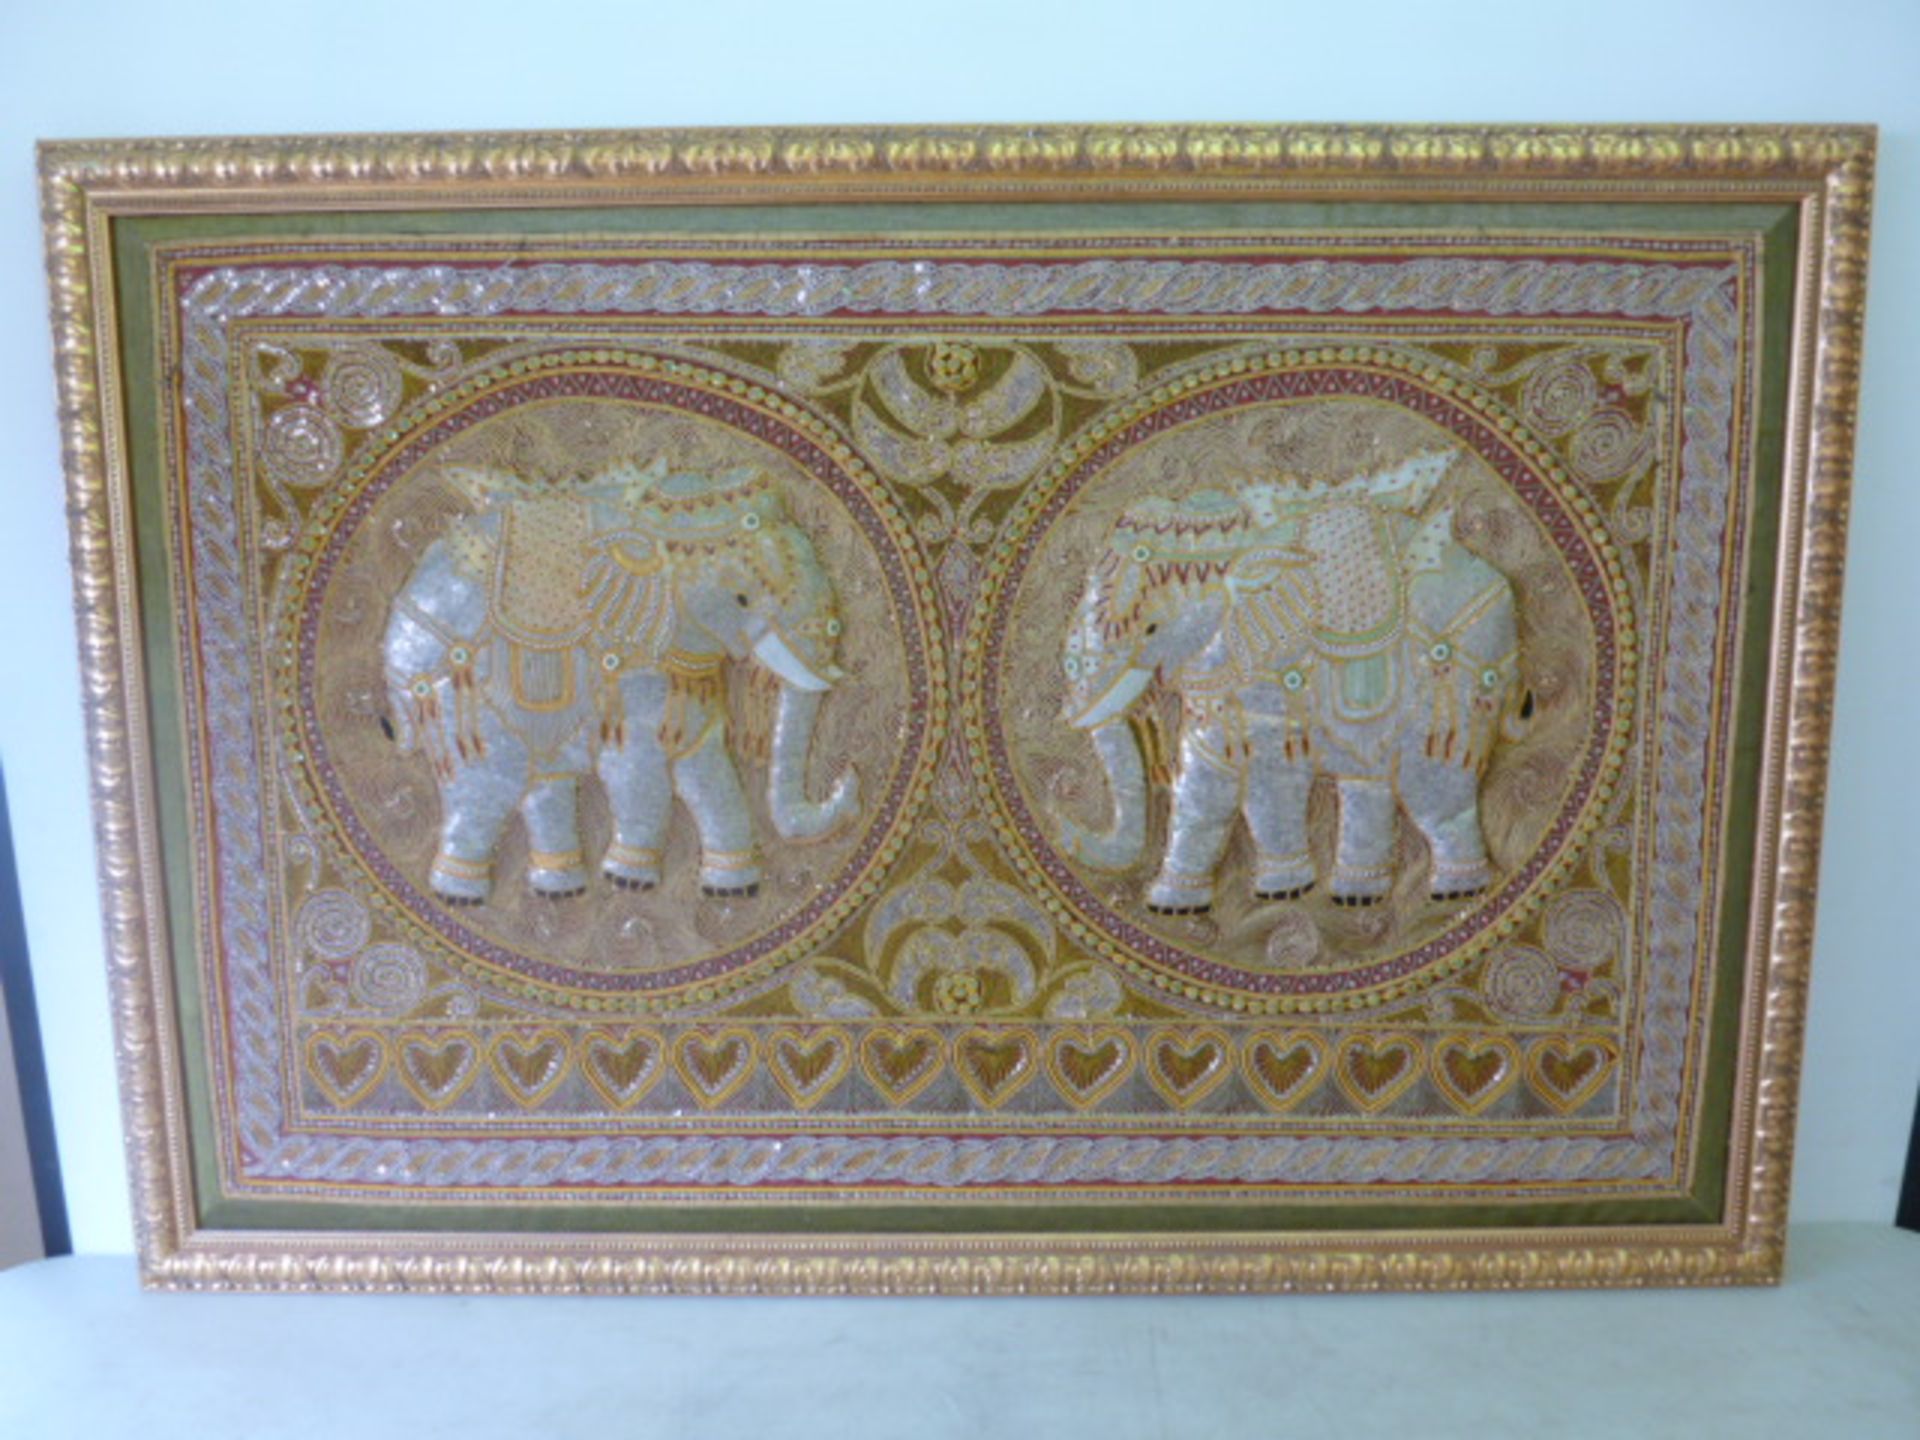 Gilt Framed Embroidery of 2 Indian Elephants with Raised 3D Effect. Intricate Detailing with Gold